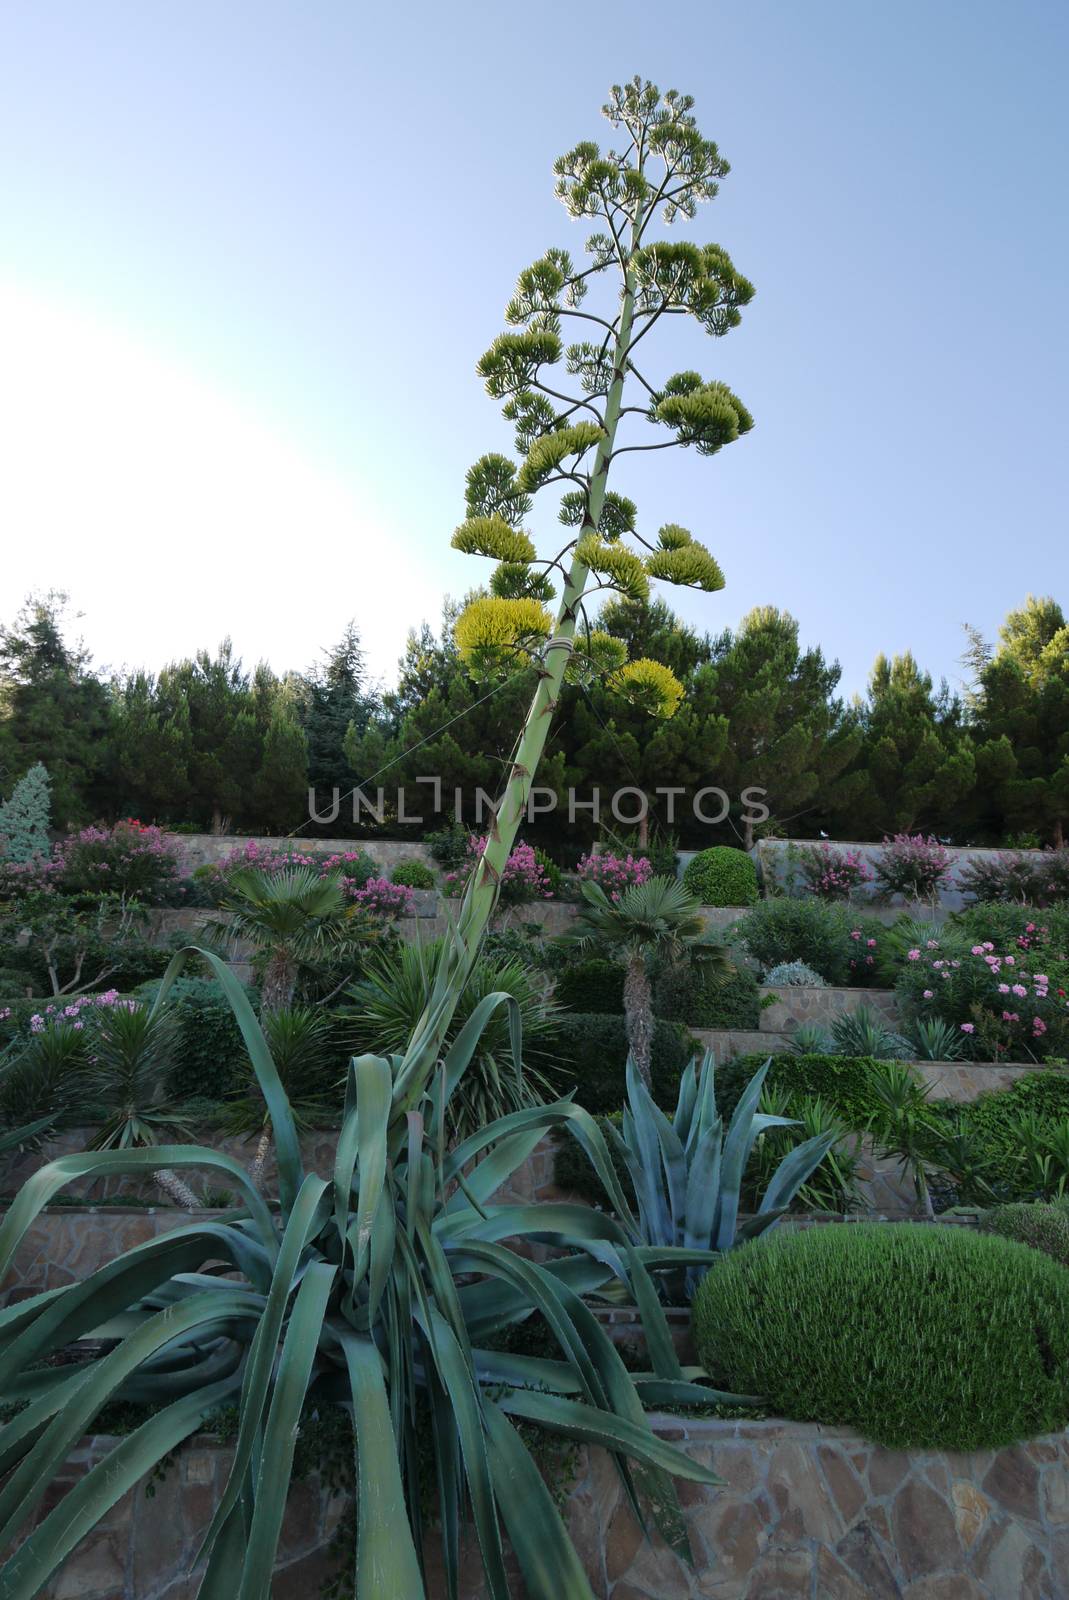 A giant plant tied with a rope towering over flowers on a flower bed